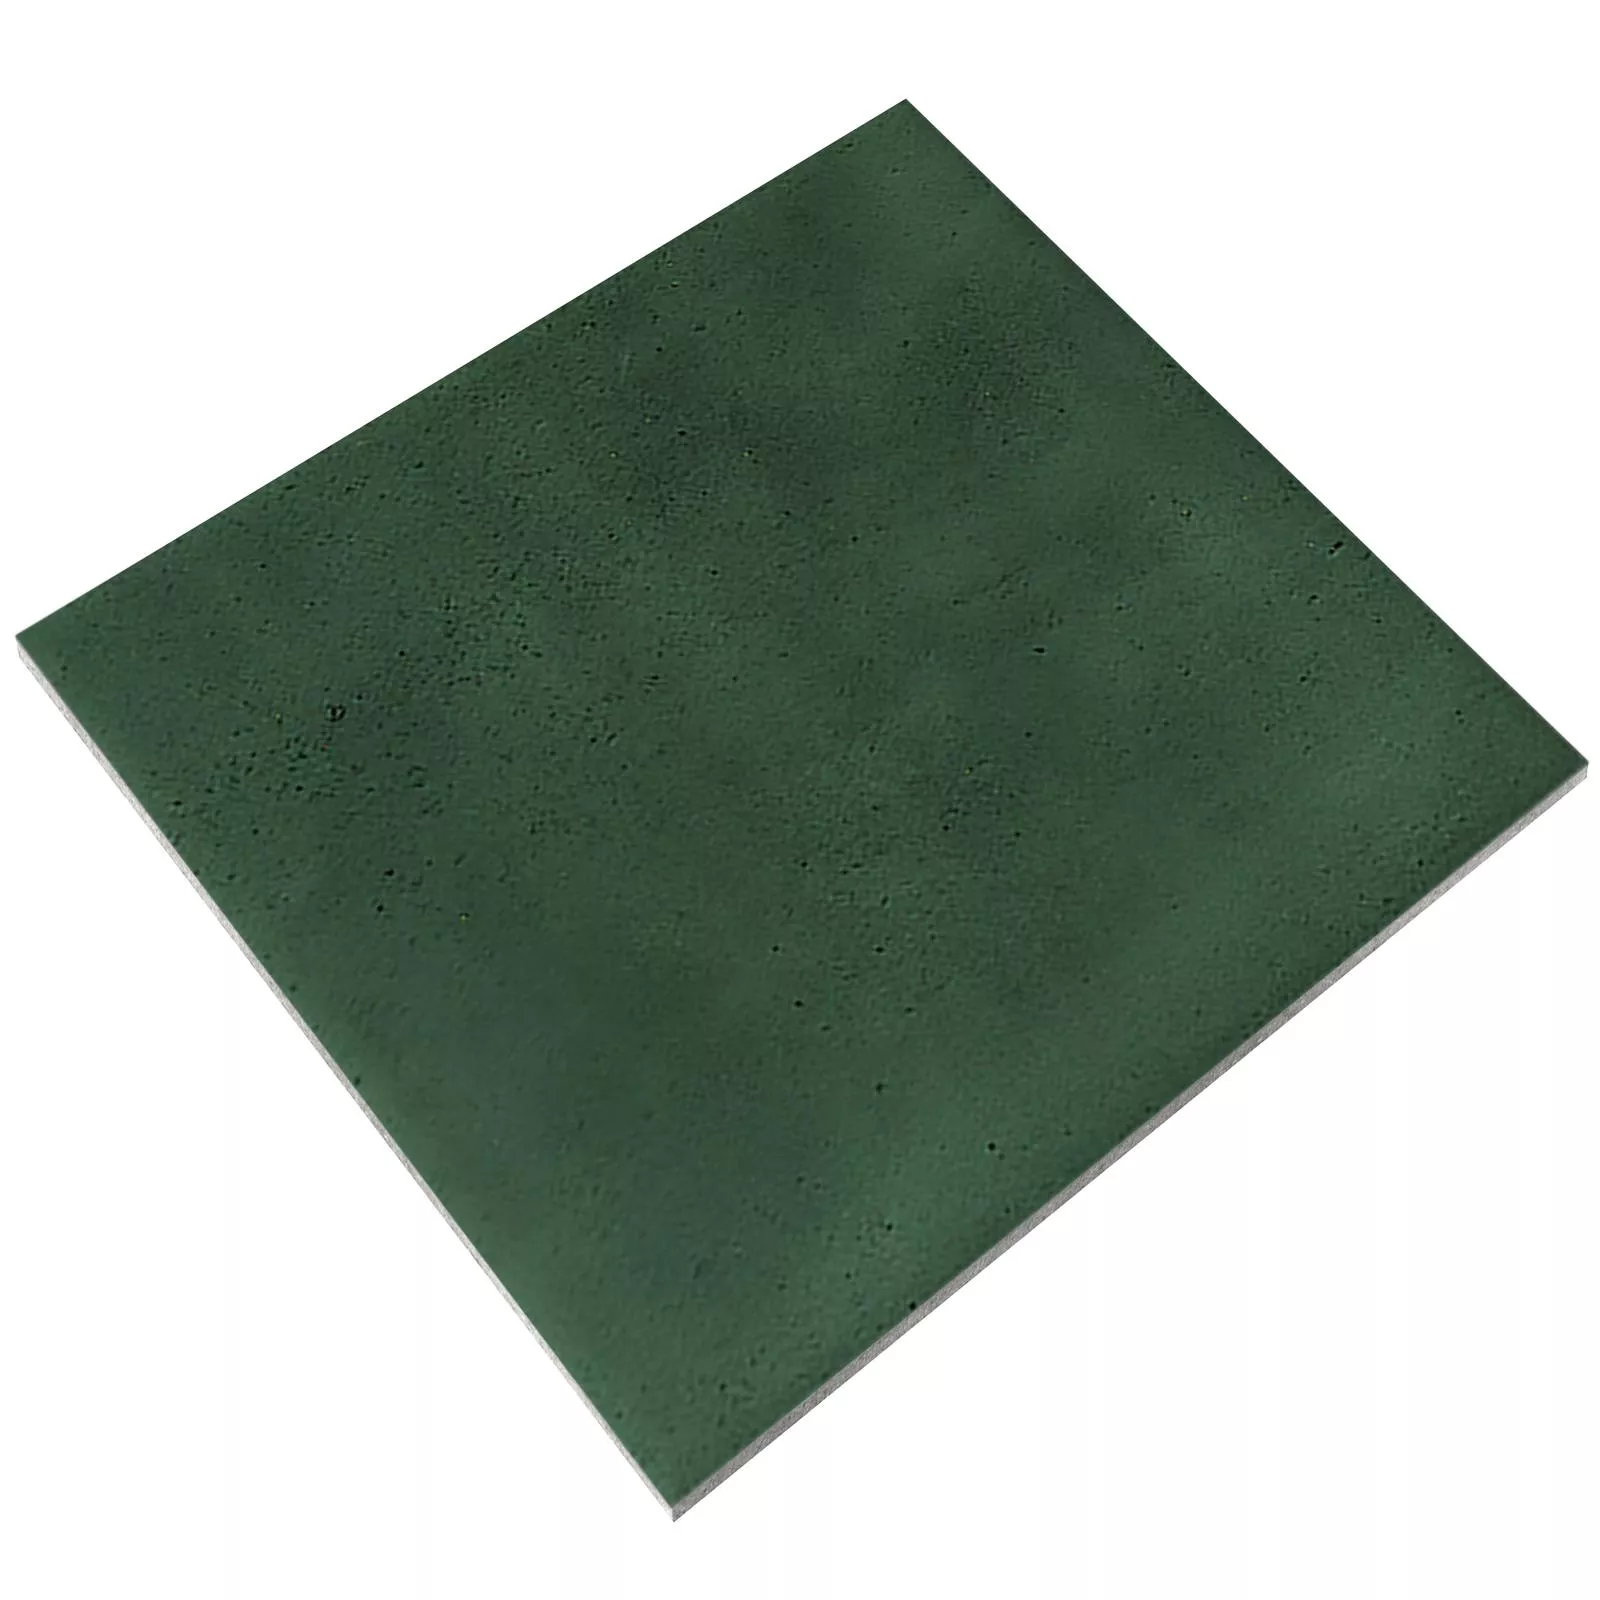 Sample Wall Tile Cap Town Glossy Waved 10x10cm Green